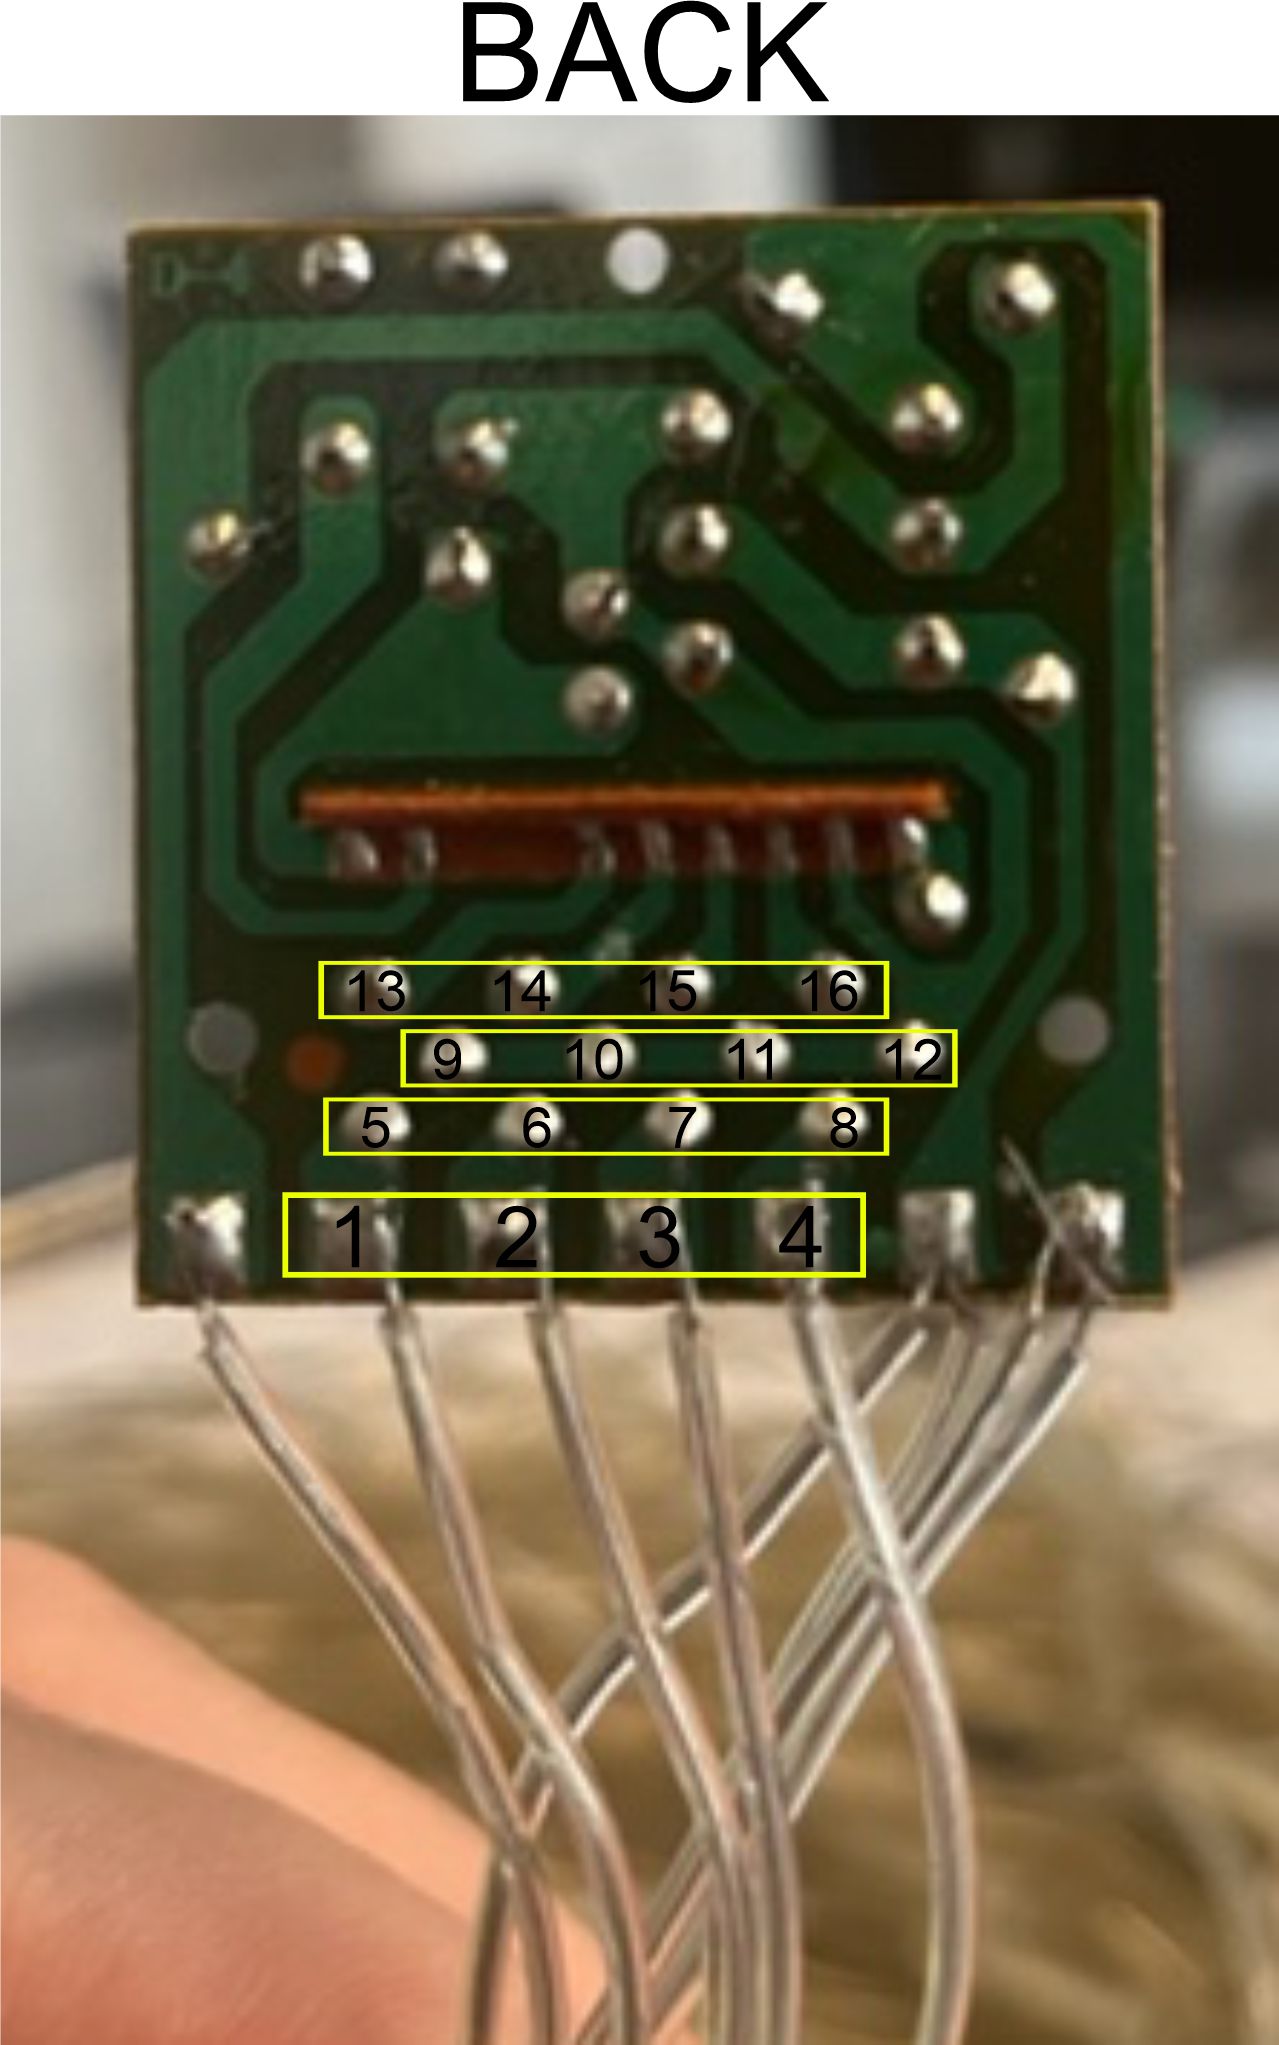 microcontroller - Flashing LED String/Christmas lights to steady on -  Electrical Engineering Stack Exchange